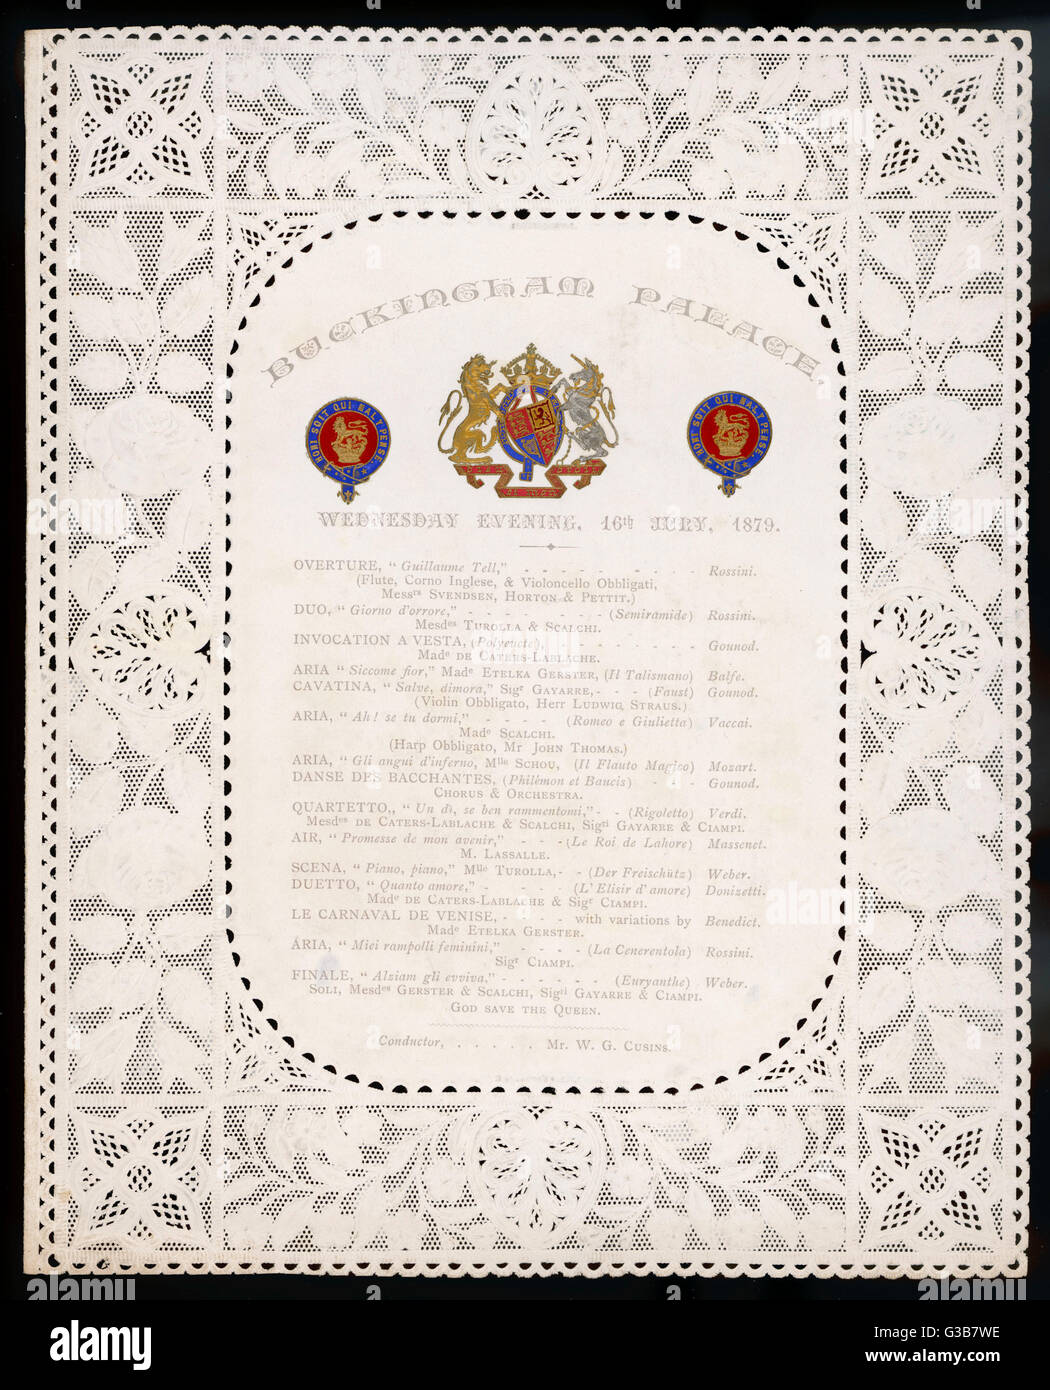 A rich and varied assortment  of pieces, doubtless selected  by Victoria herself, performed  at Buckingham Palace.       Date: 16 July 1879 Stock Photo